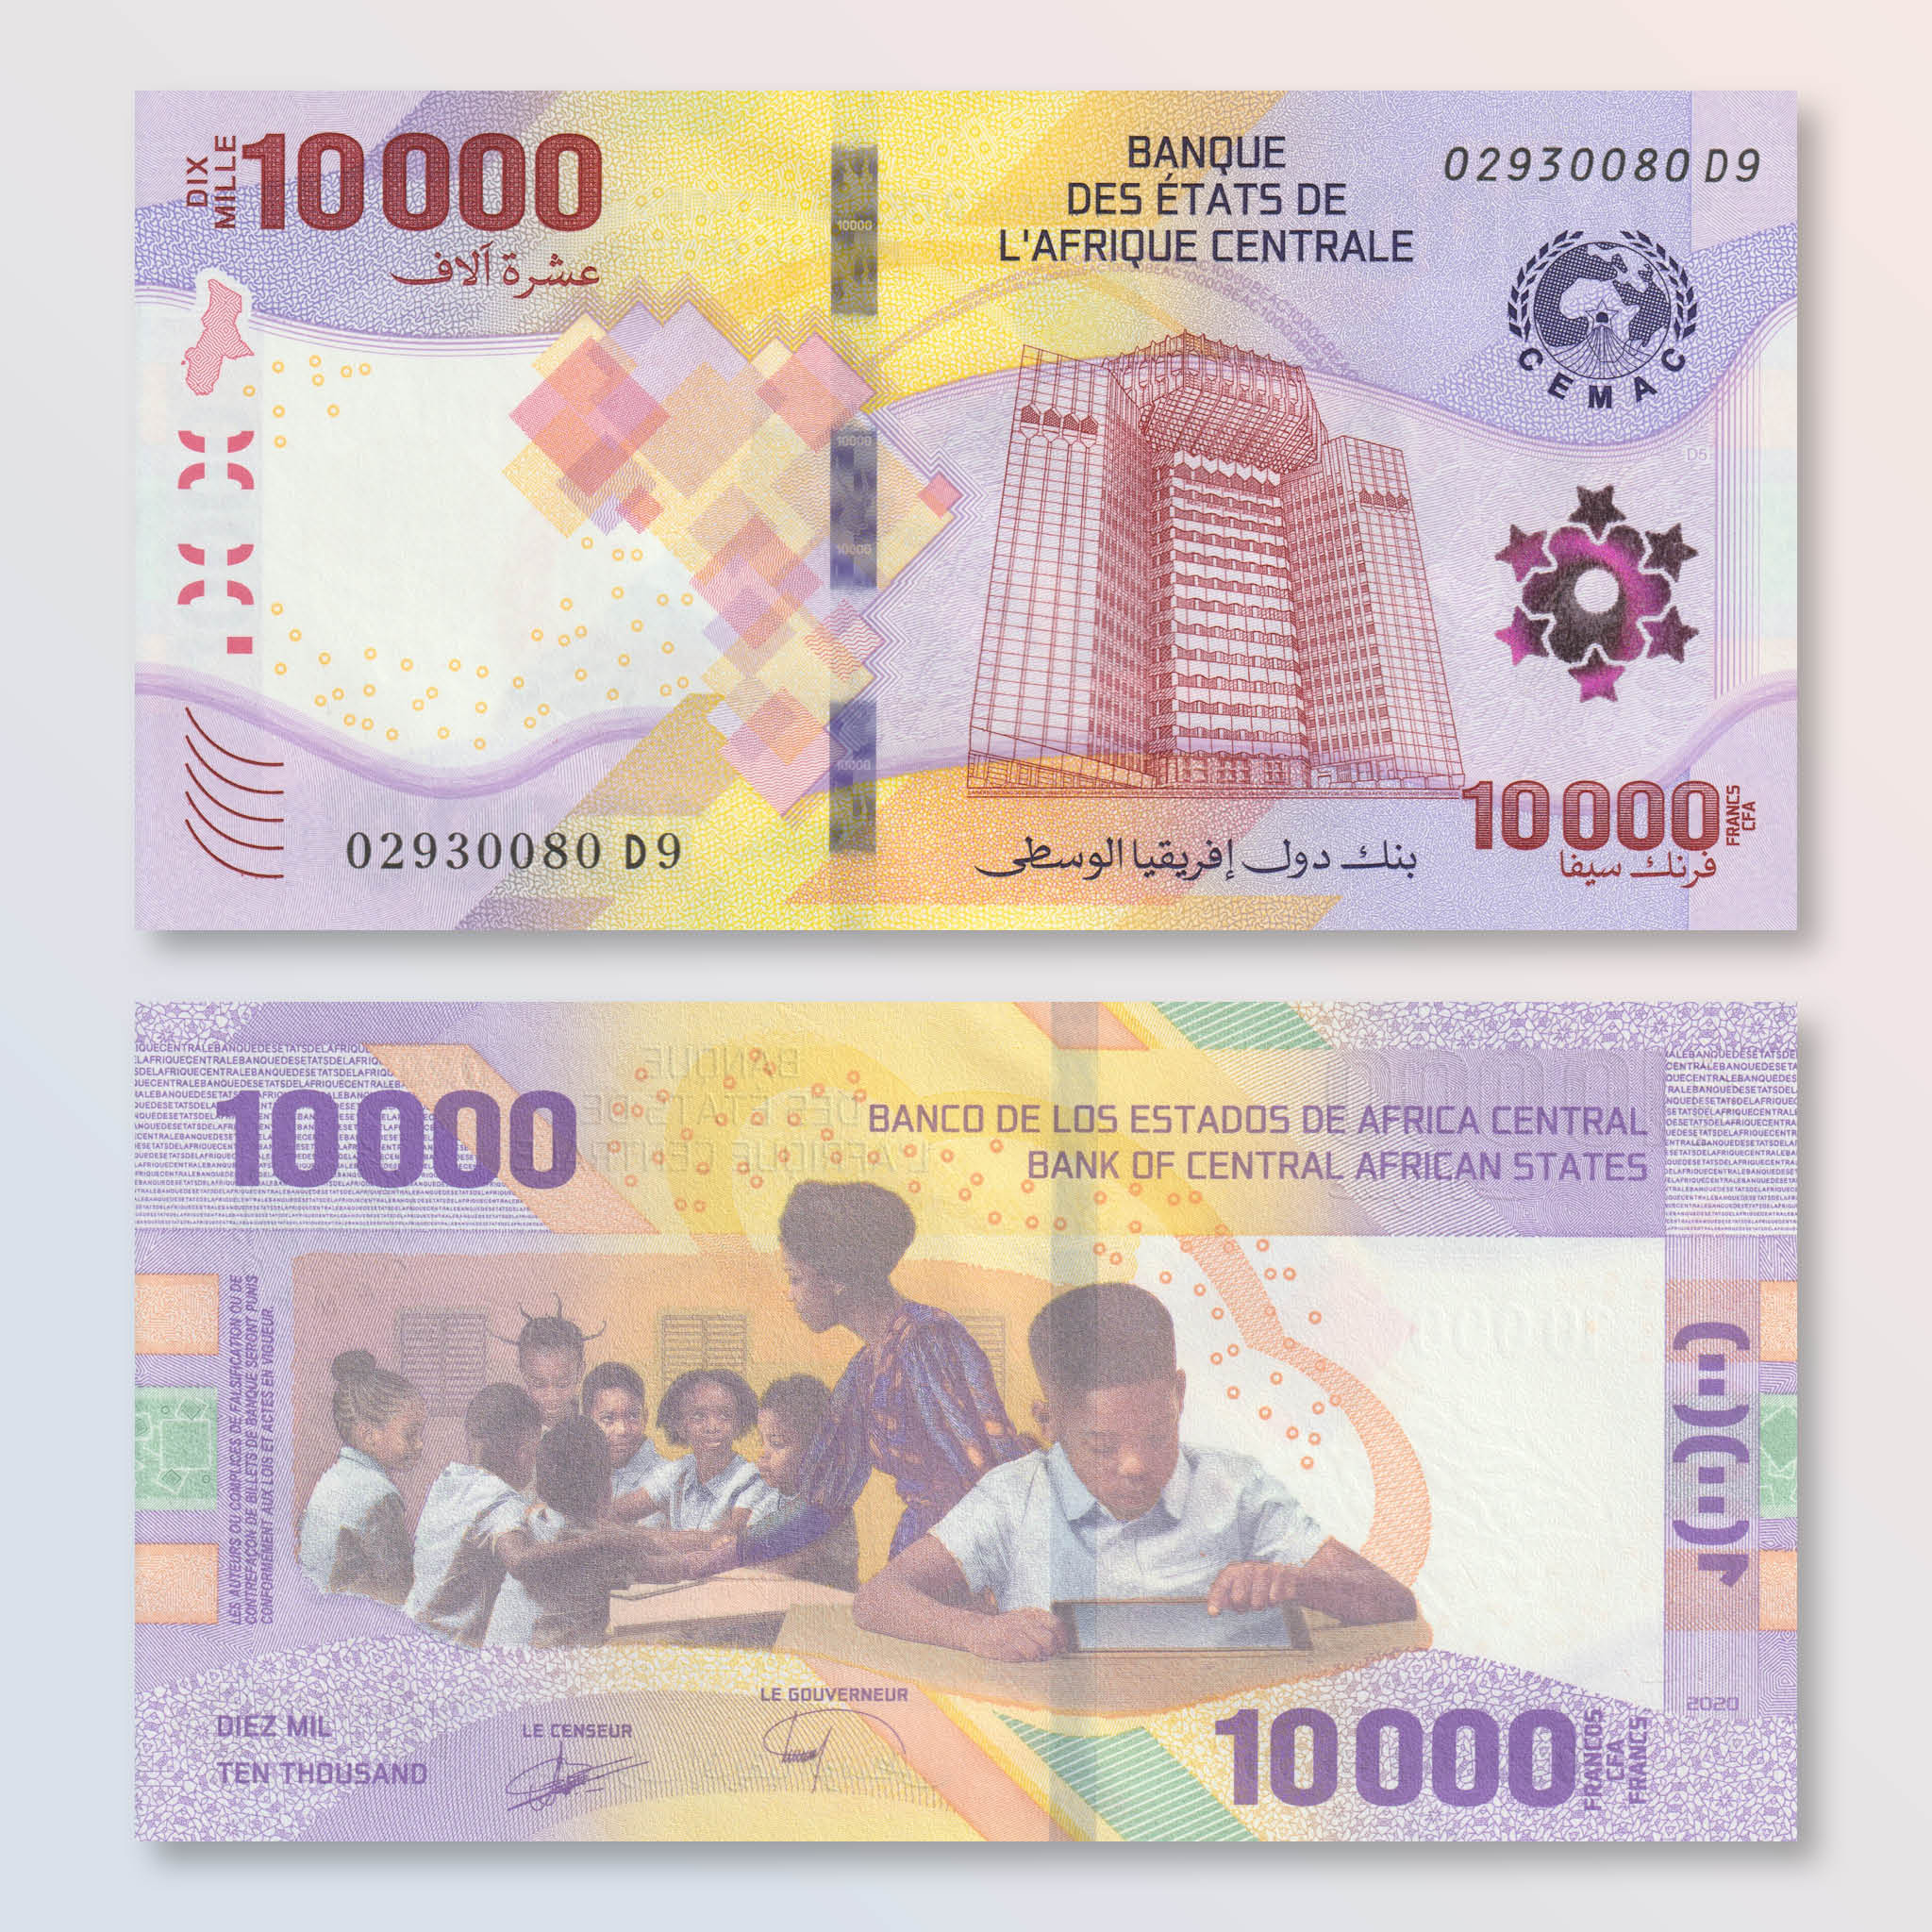 Central African States 10000 Francs, 2020 (2022), B115a, UNC - Robert's World Money - World Banknotes